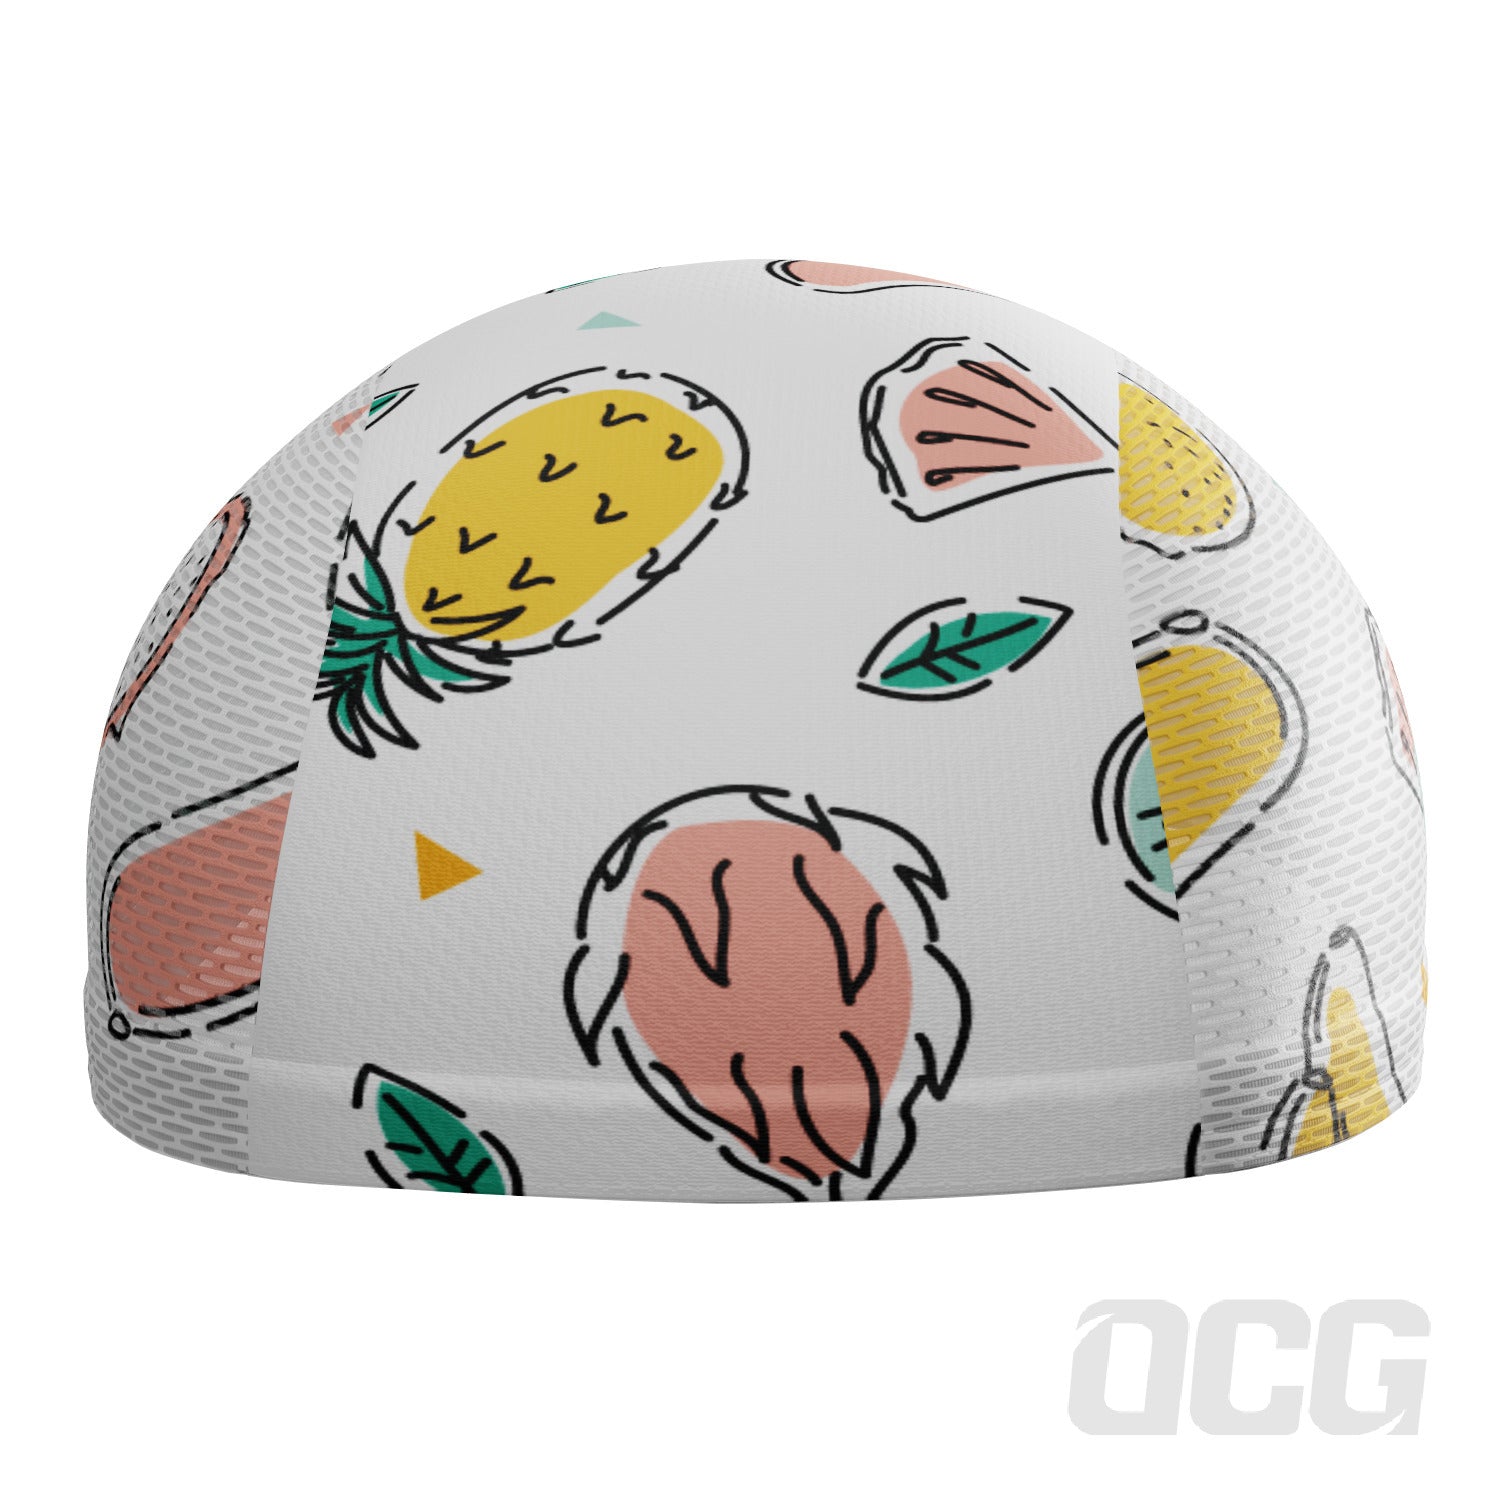 Unisex Squeeze The Day Quick-Dry Cycling Cap